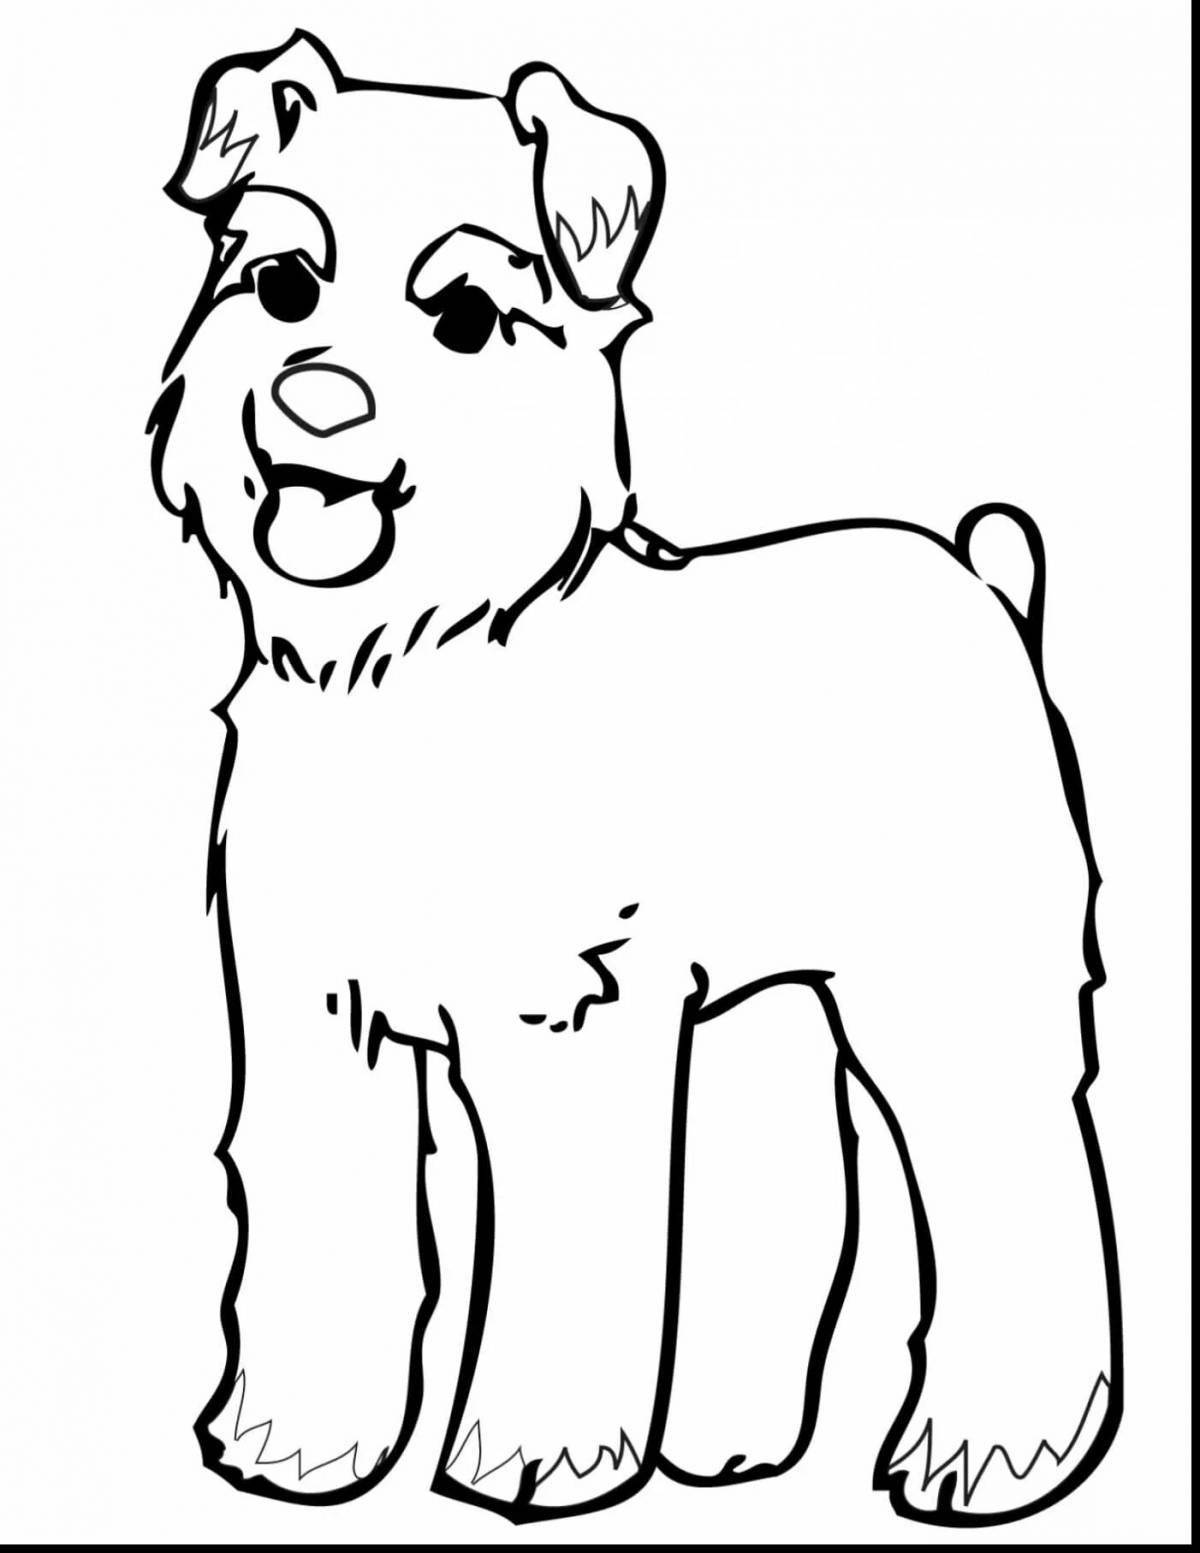 Coloring page dazzling dog for kids